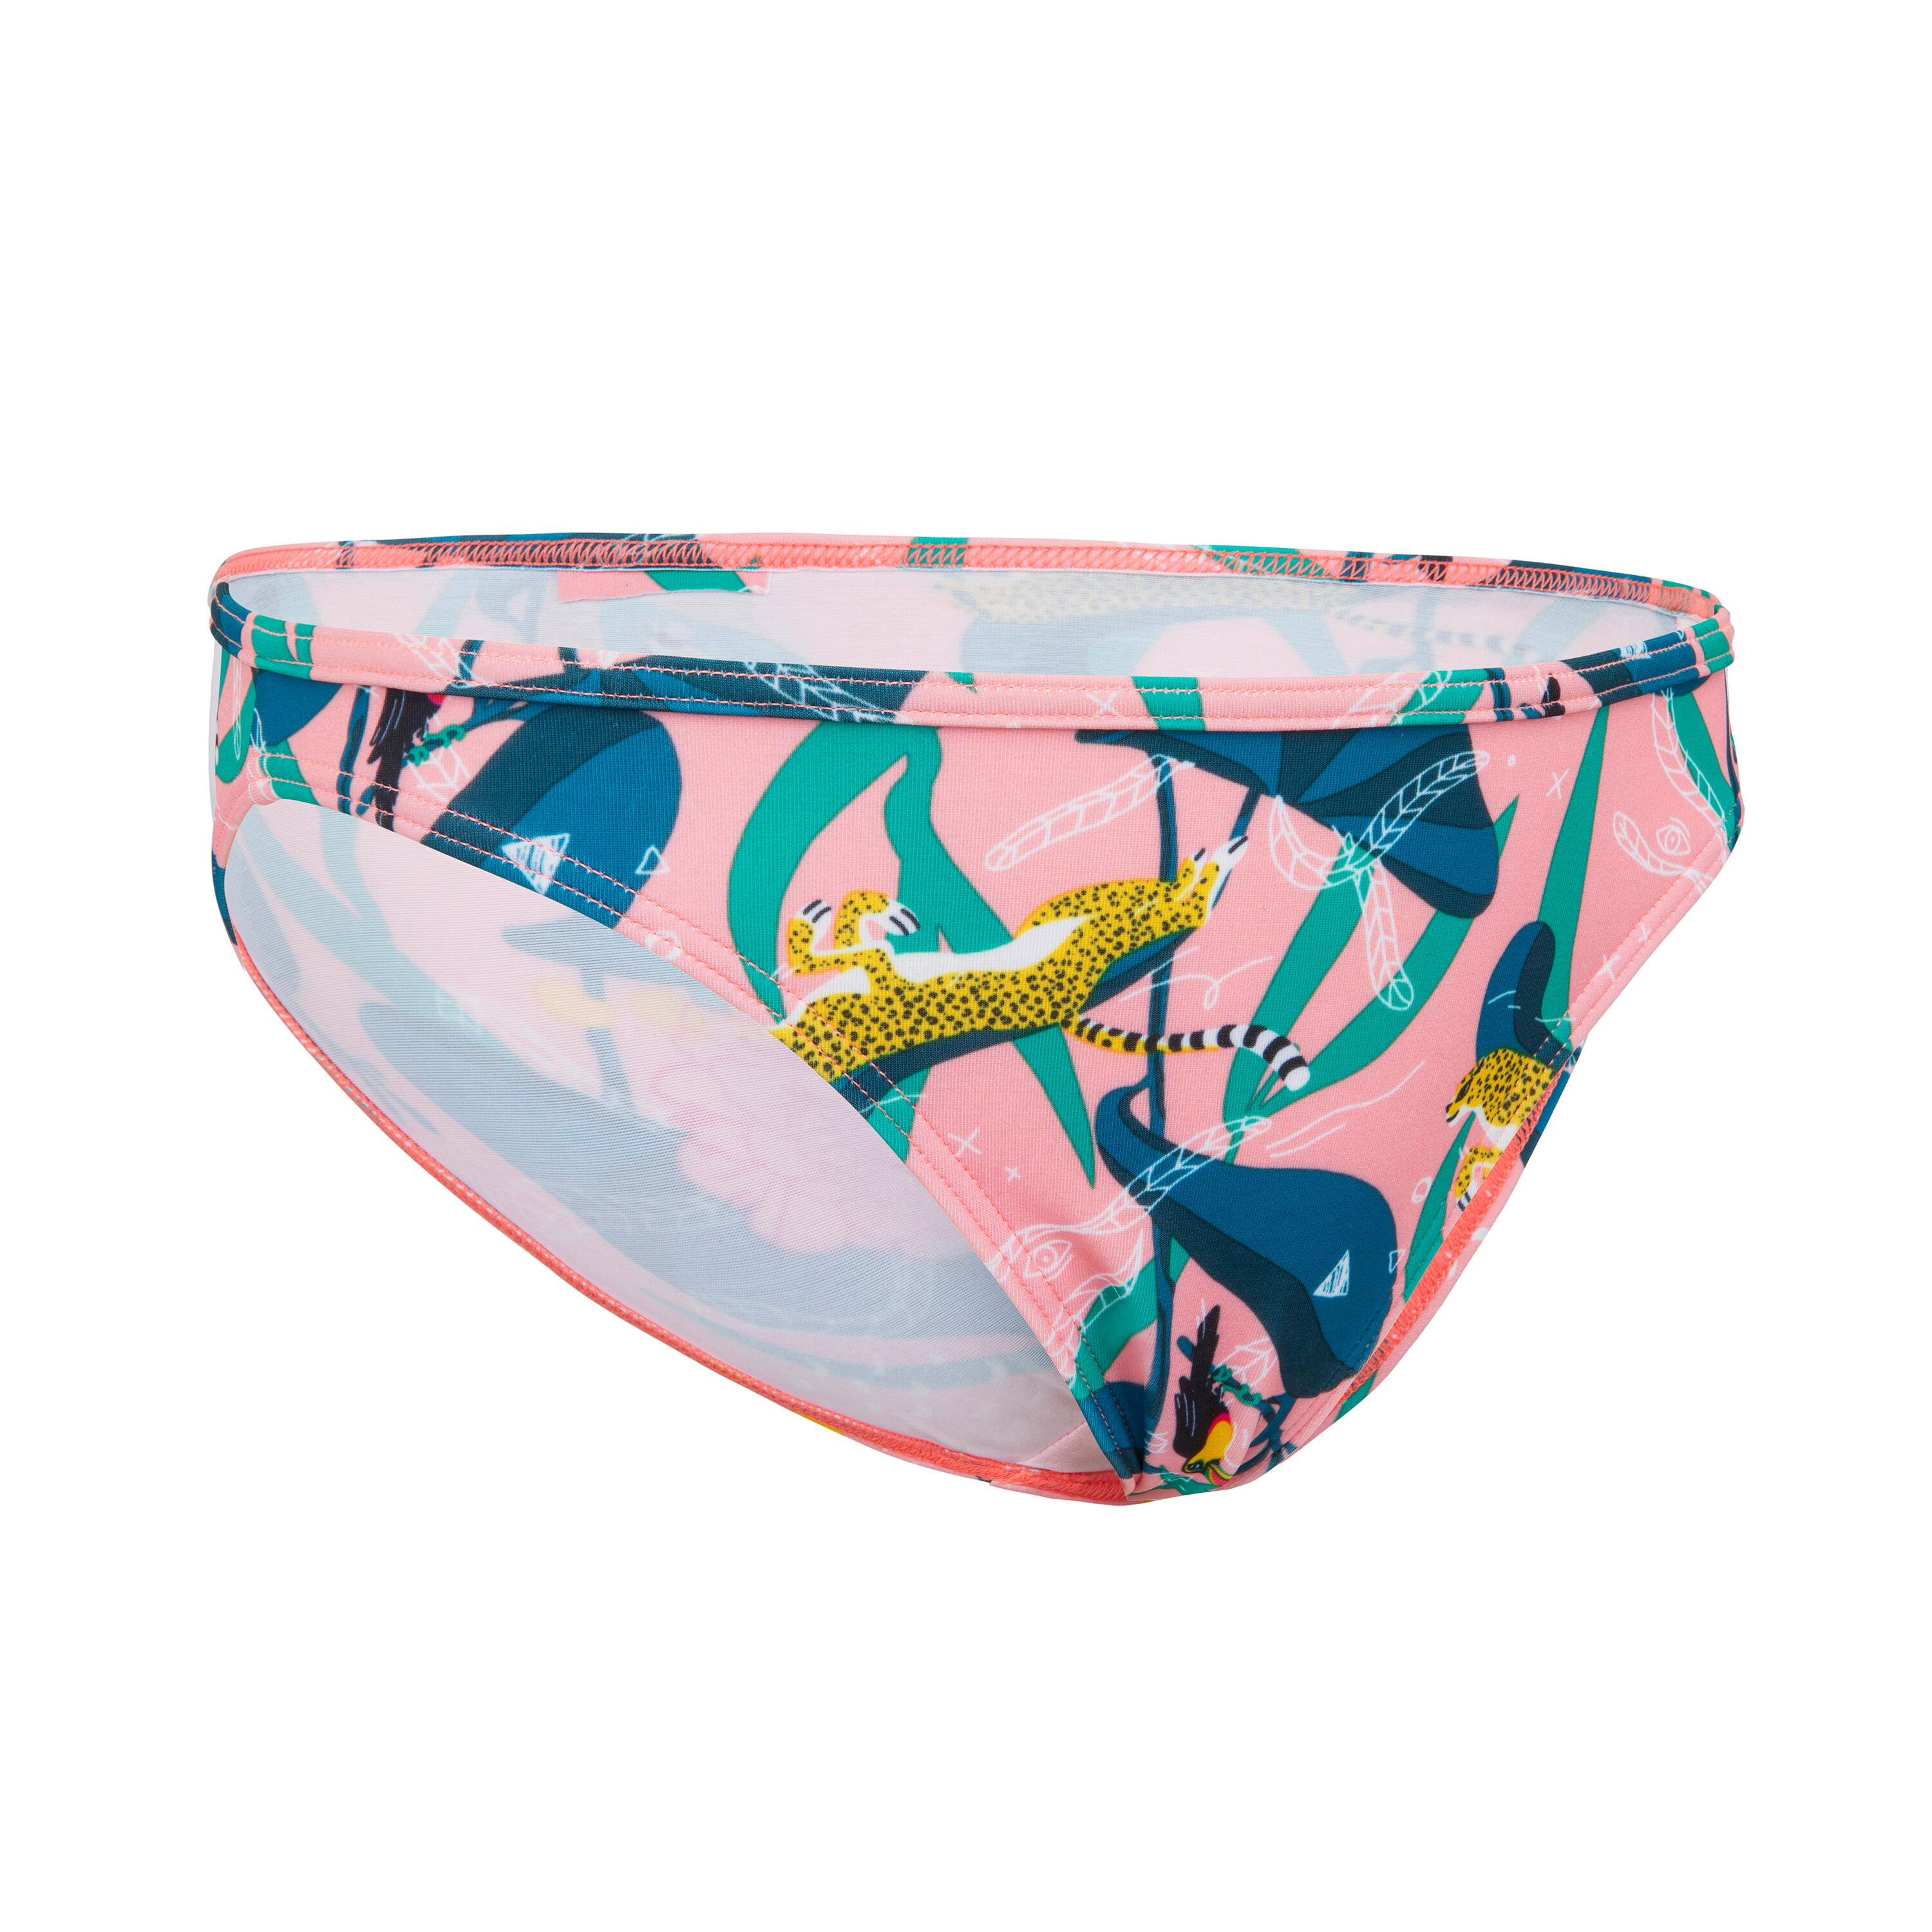 Image of Girls’ Swimsuit Bottoms - 100 Pink